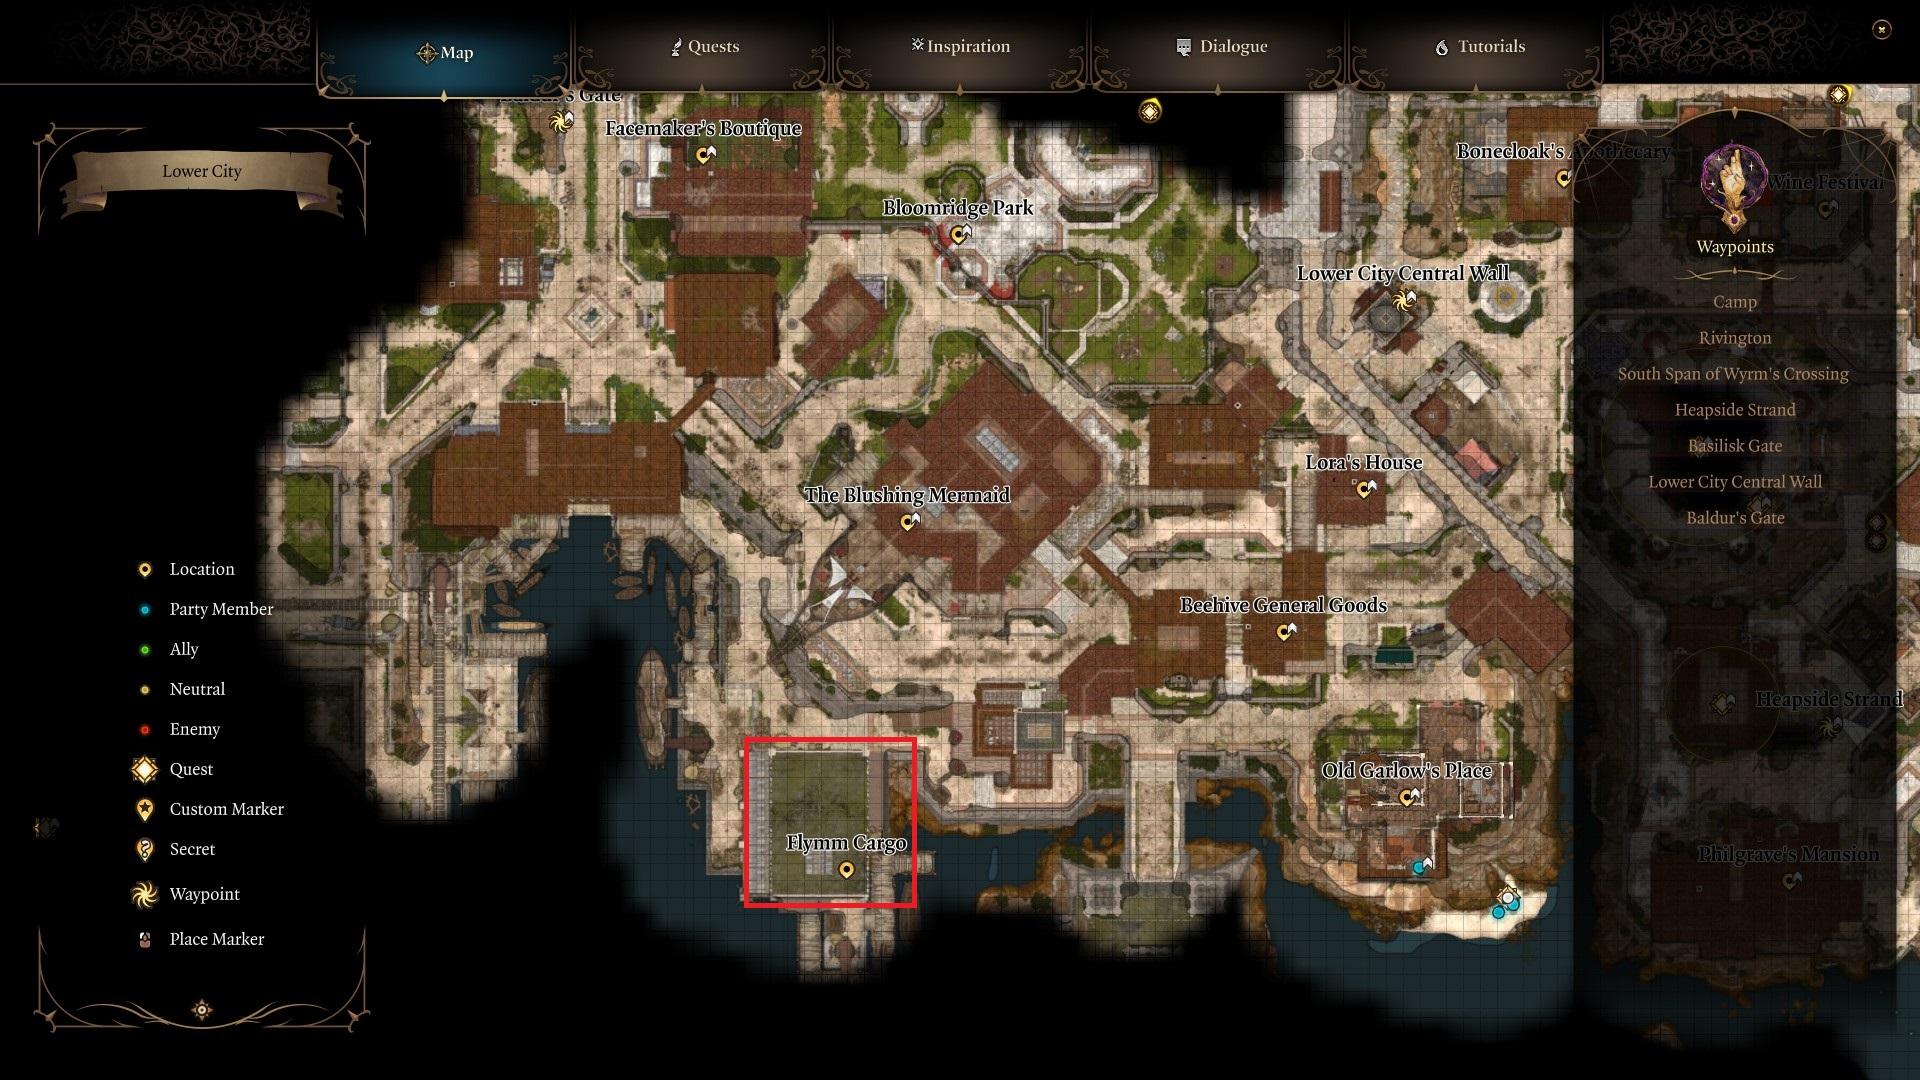 bg3 lower city map with a red square around flymm